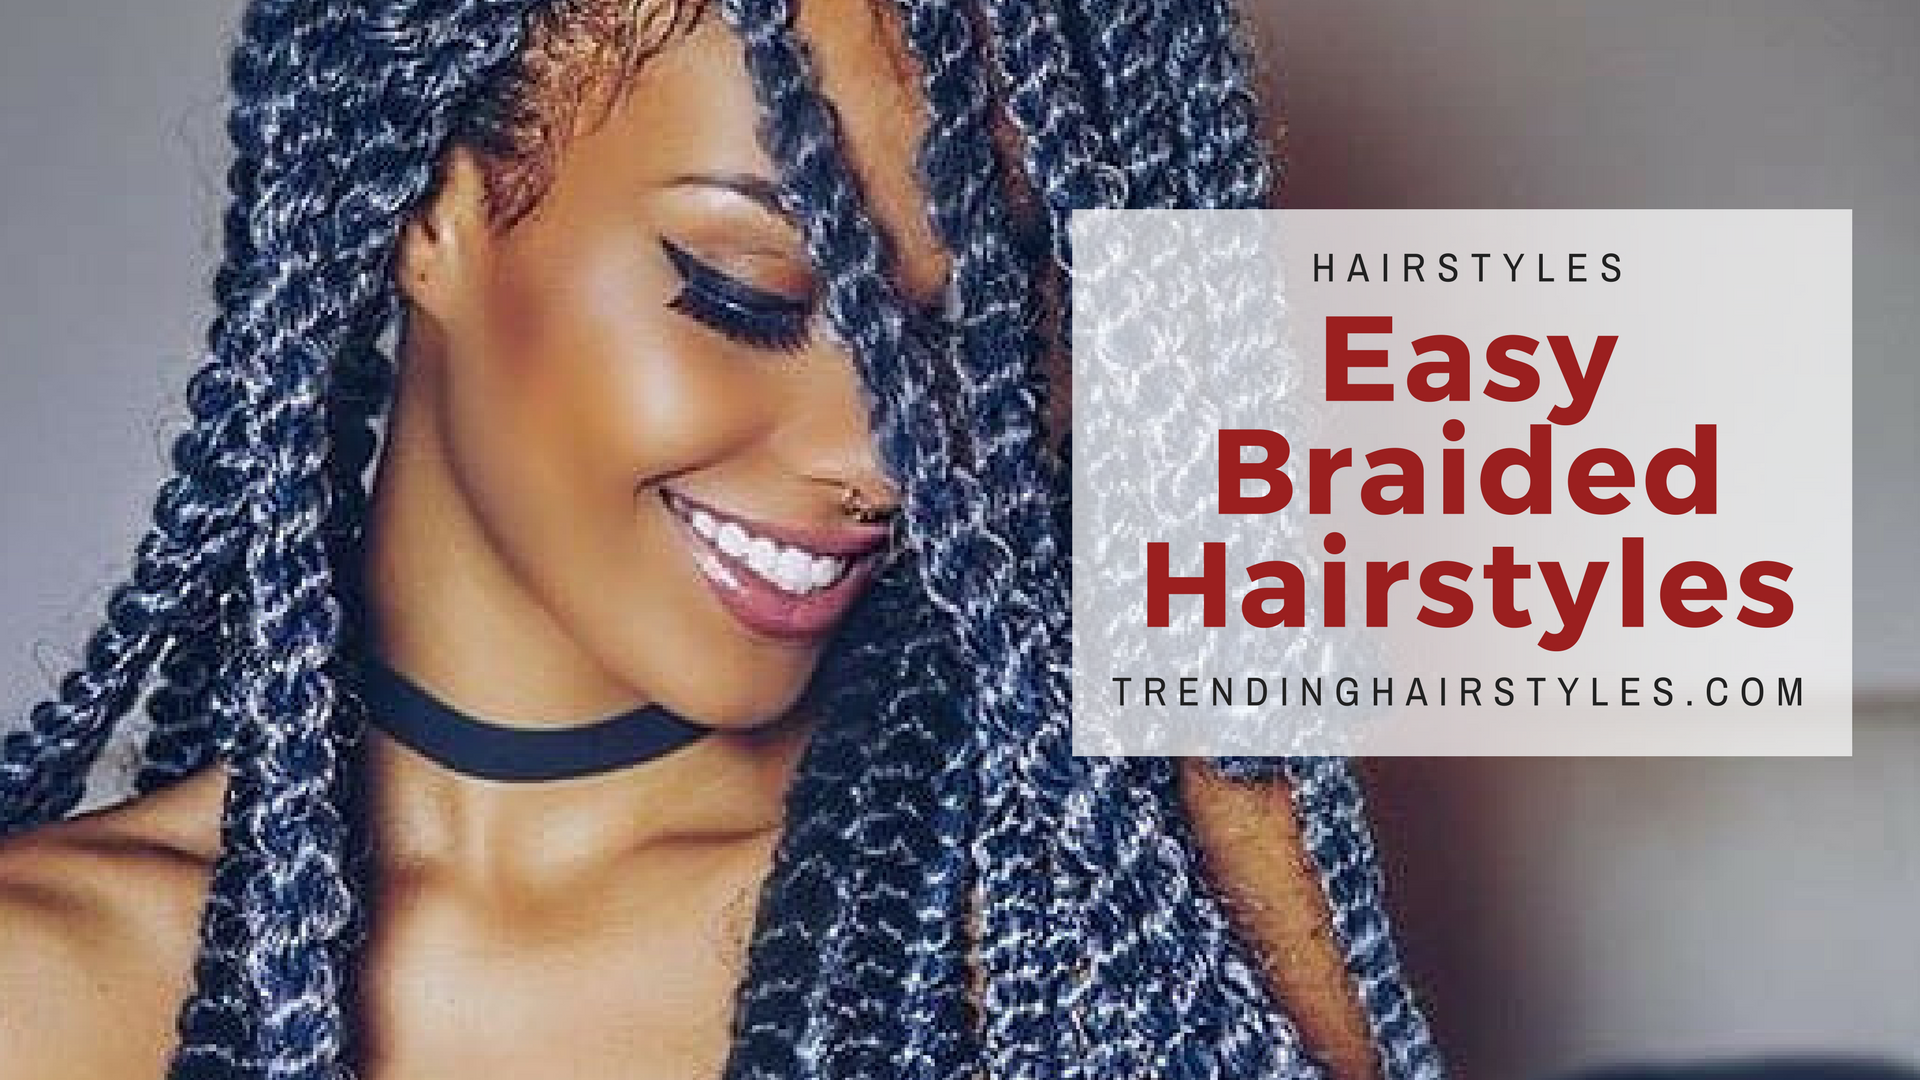 Easy Braided Hairstyles Top 5 Amazing New Braids For Black